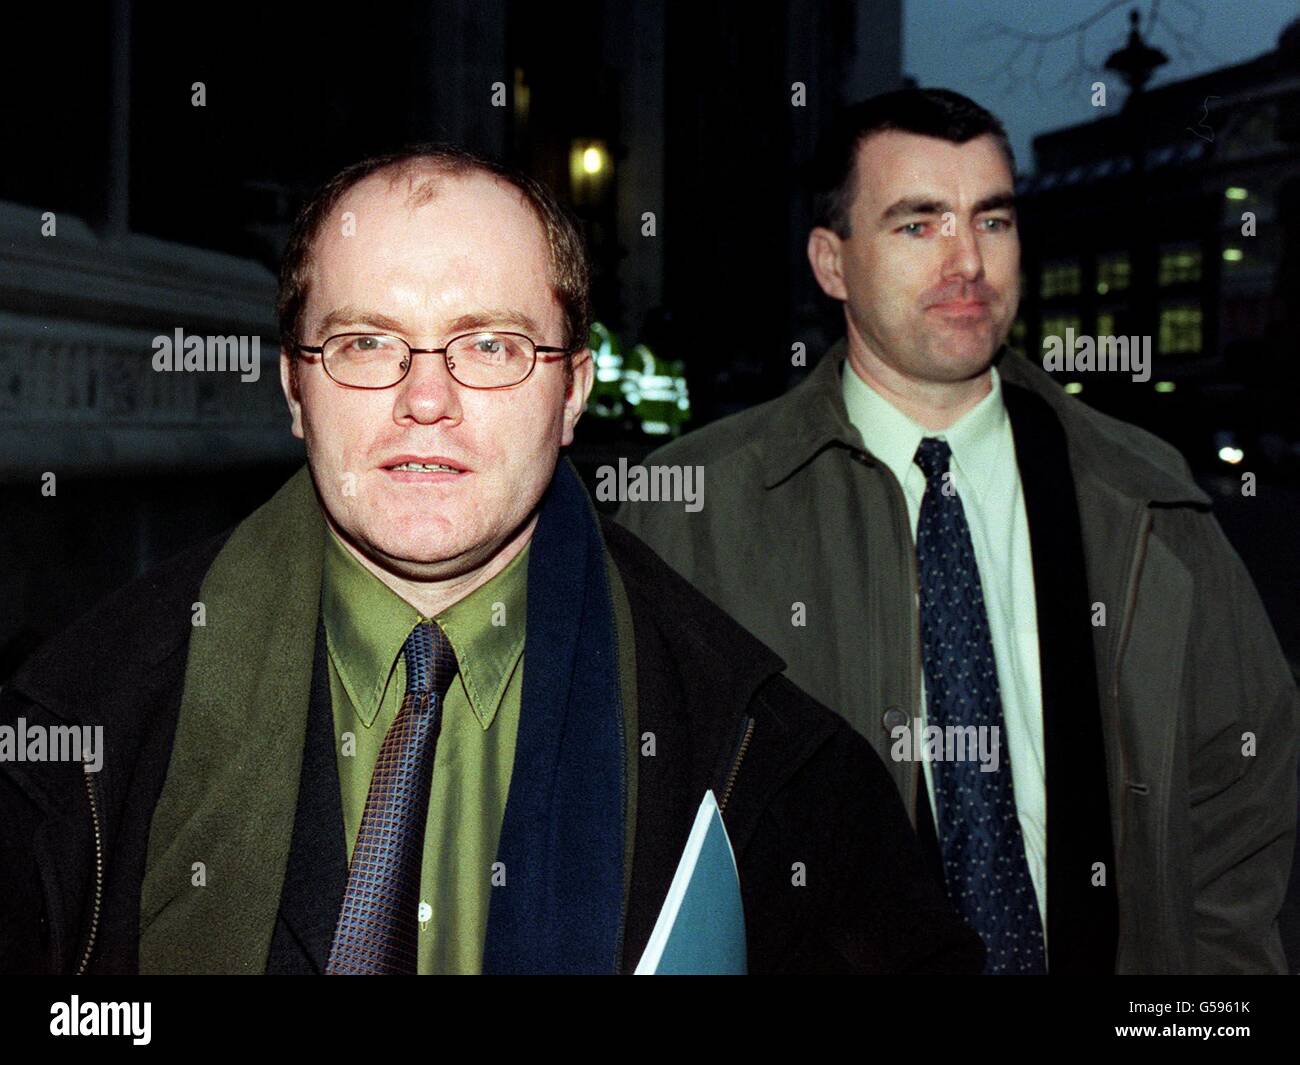 Two former IRA prisoners, Danny McNamee, 40, (left) and Liam McCotter, 37, leaving the High Court in London, where they are attempting to sue the Home Office for damages over injuries they claim were inflicted on them by prison officers. * after an unsuccessful breakout from Whitemoor prison in Cambridgeshire. 2/3/2001: Judgment in the damages case is expected to be given. The two former prisoners and an armed robber have brought the action over alleged 'deliberate attacks' by prison officers in the wake of an unsuccessful breakout. Stock Photo